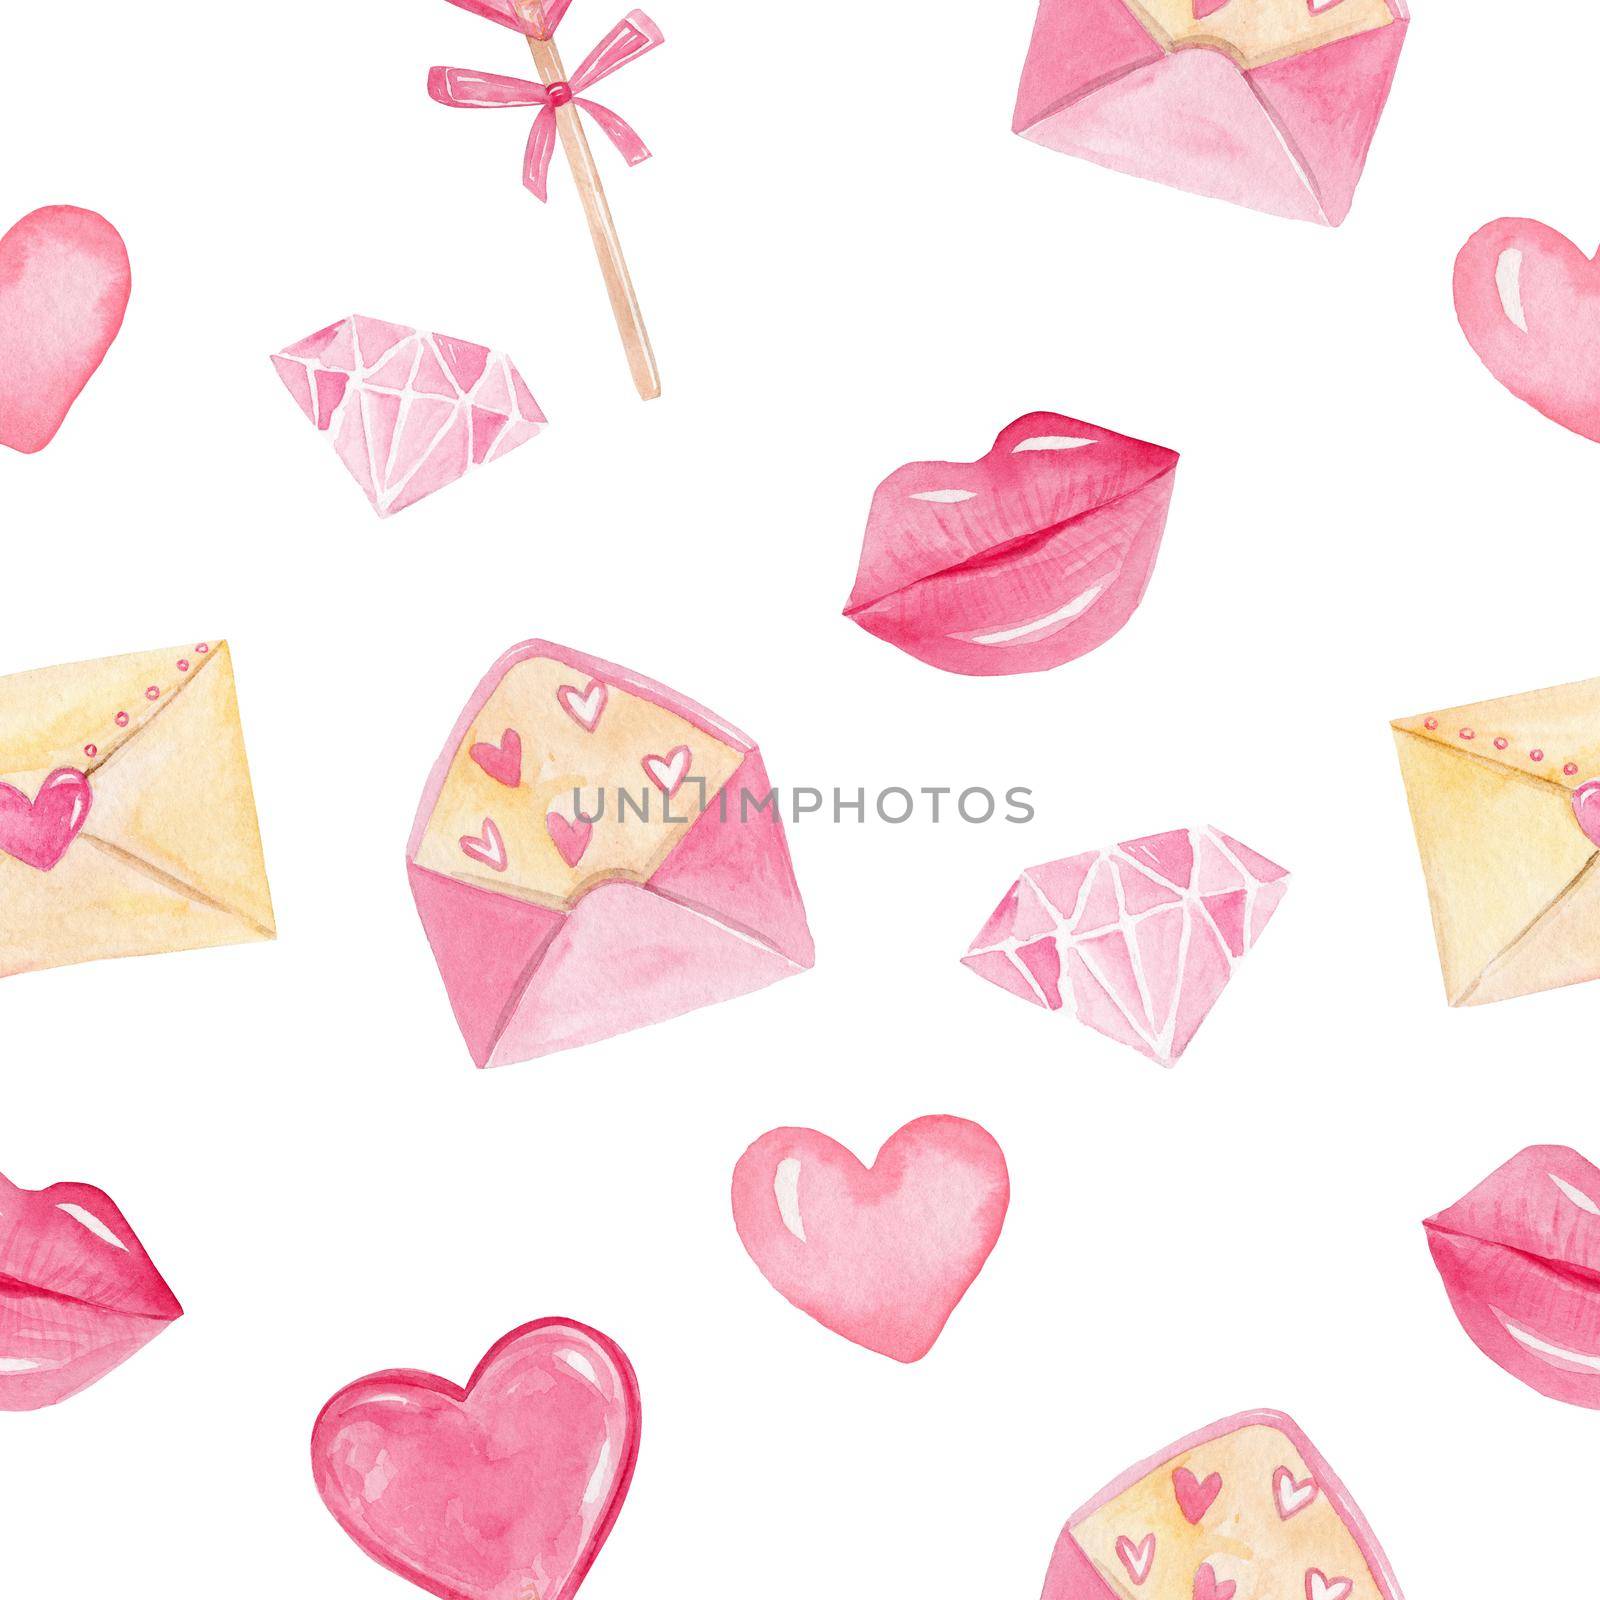 watercolor pink kisses and hearts seamless pattern on white background. Valentines day print with envelopes, diamonds, candy. perfect for fabric, textile, scrapbooking, wrapping paper